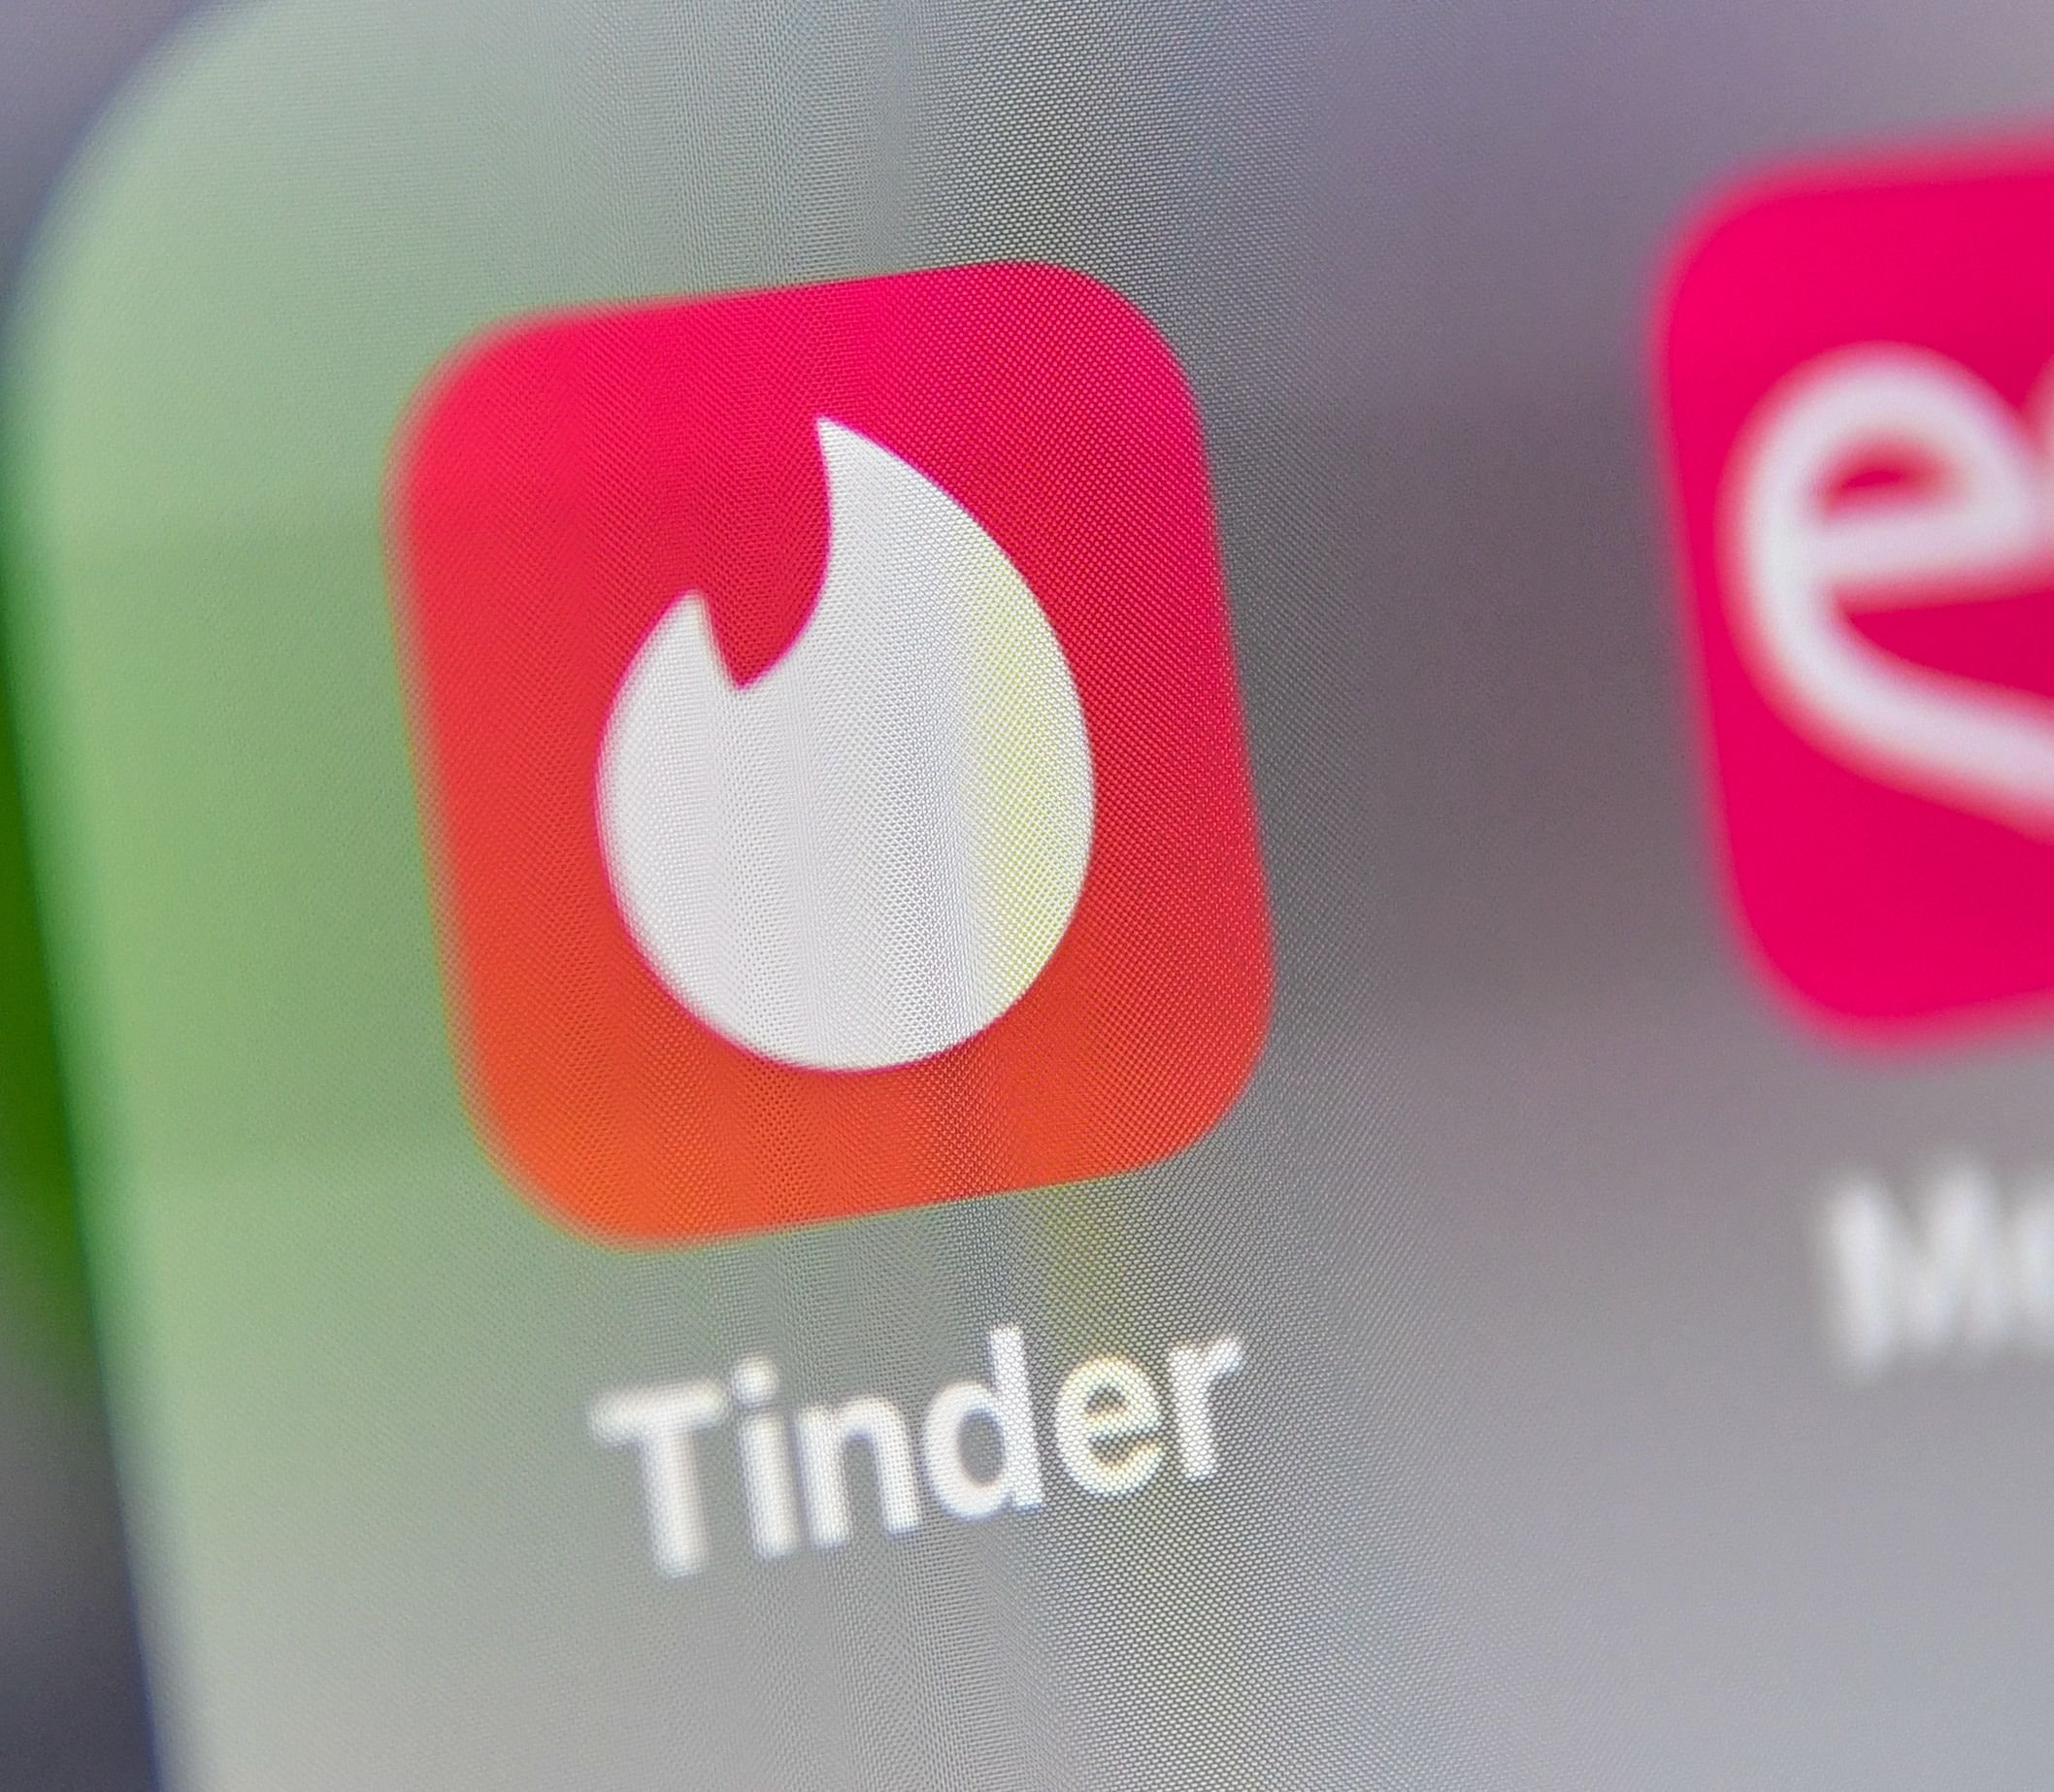 How many right swipes on tinder per day